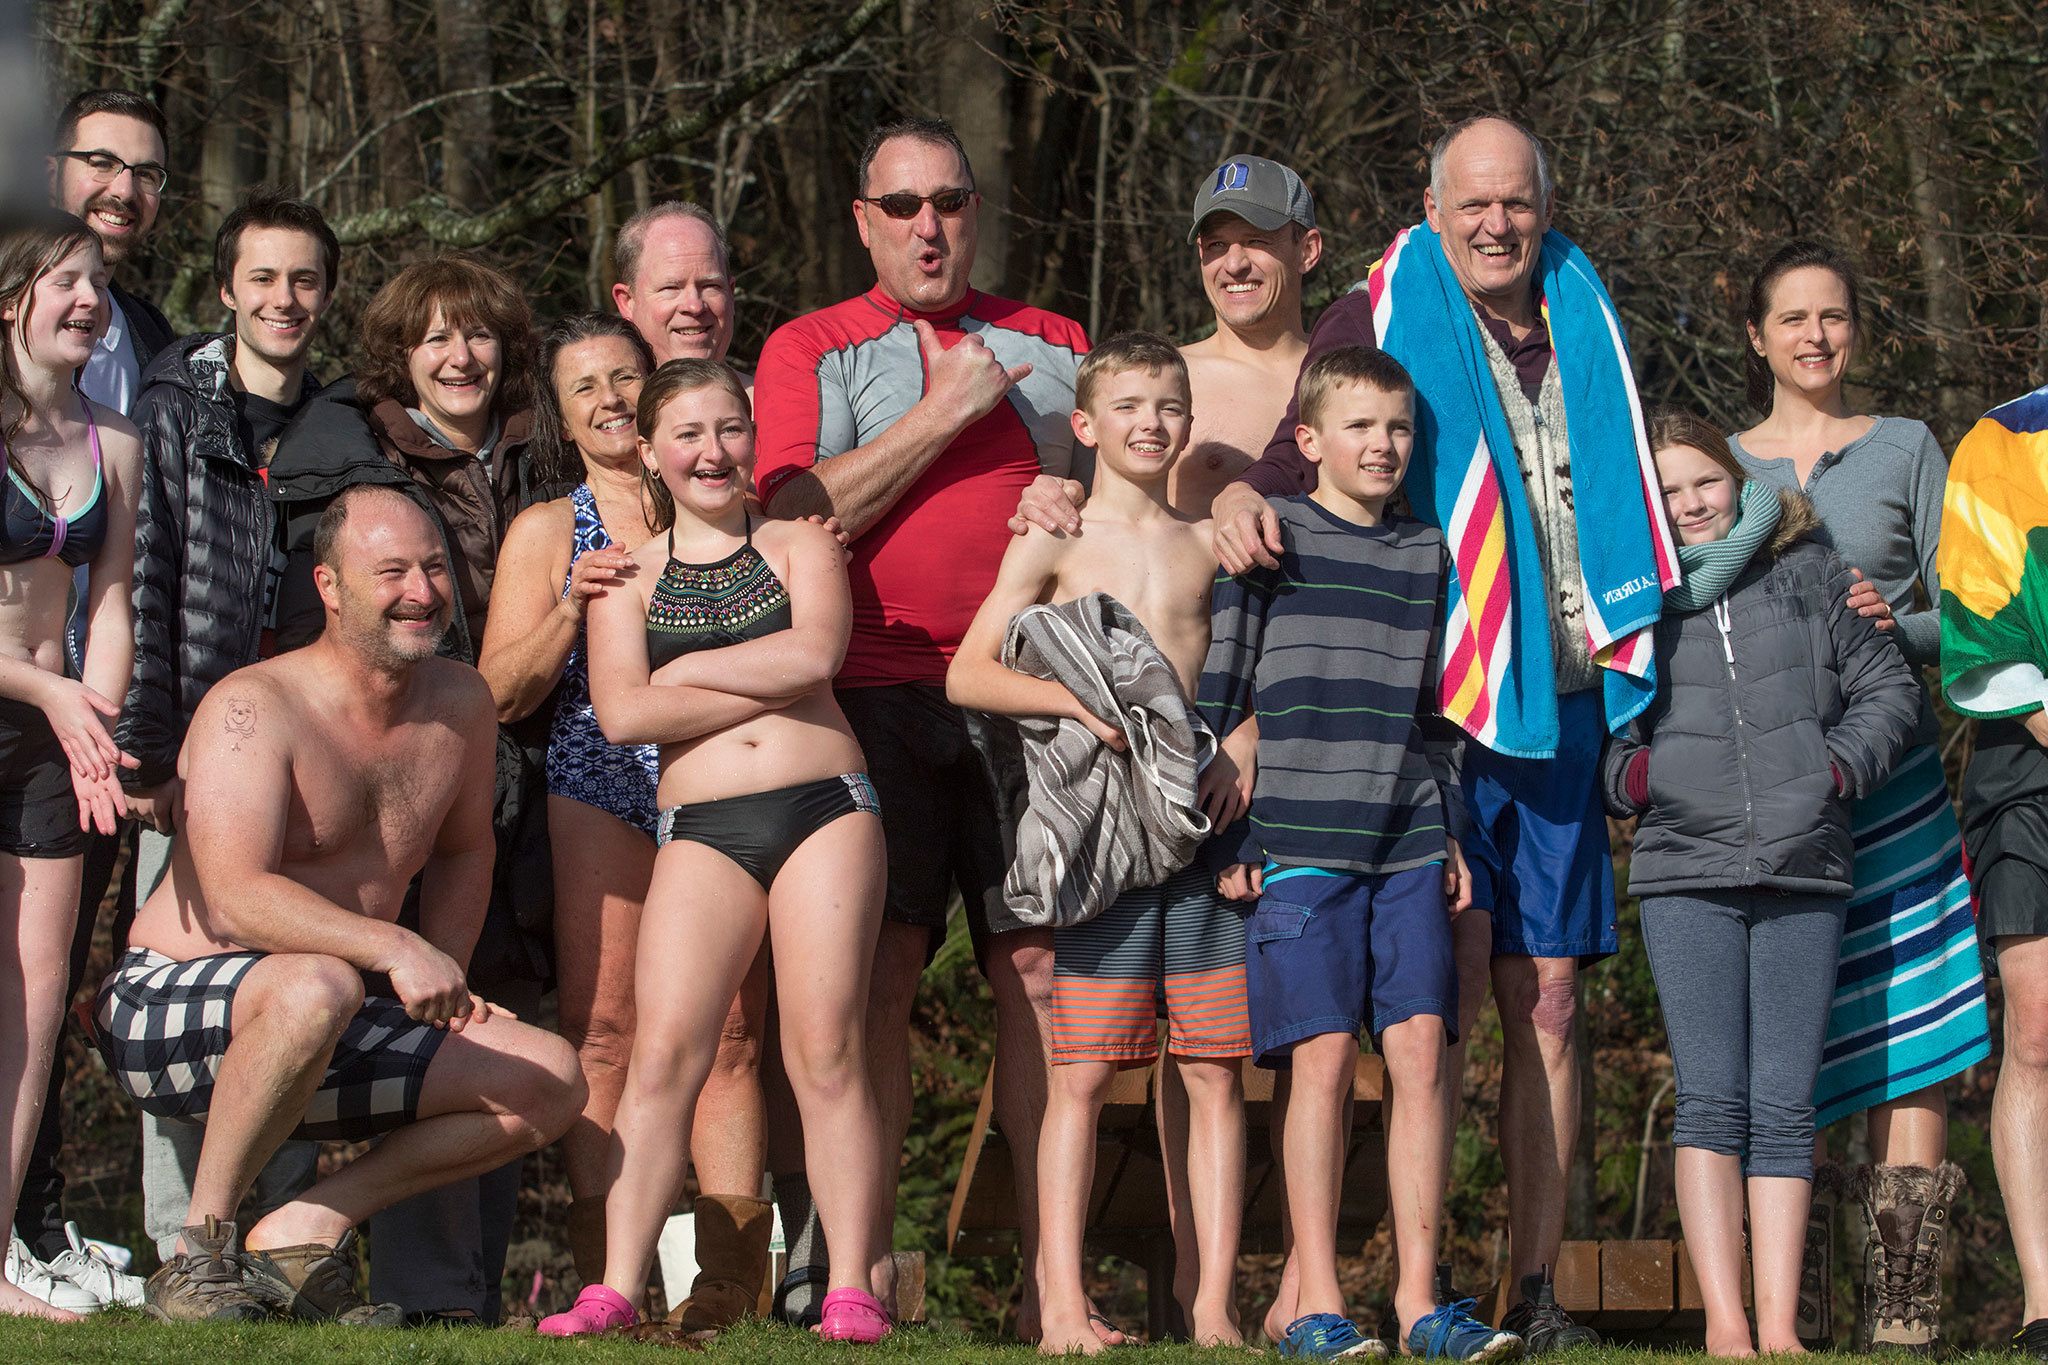 Nile Clarke, third from right, a longtime teacher and cross country coach on the Island, poses with fellow Polar Bear Plungers on New Year’s Day at Clarke Beach. It was Clarke’s 50th appearance at the plunge he began 50 years ago. Matt Brashears/Special to the Reporter